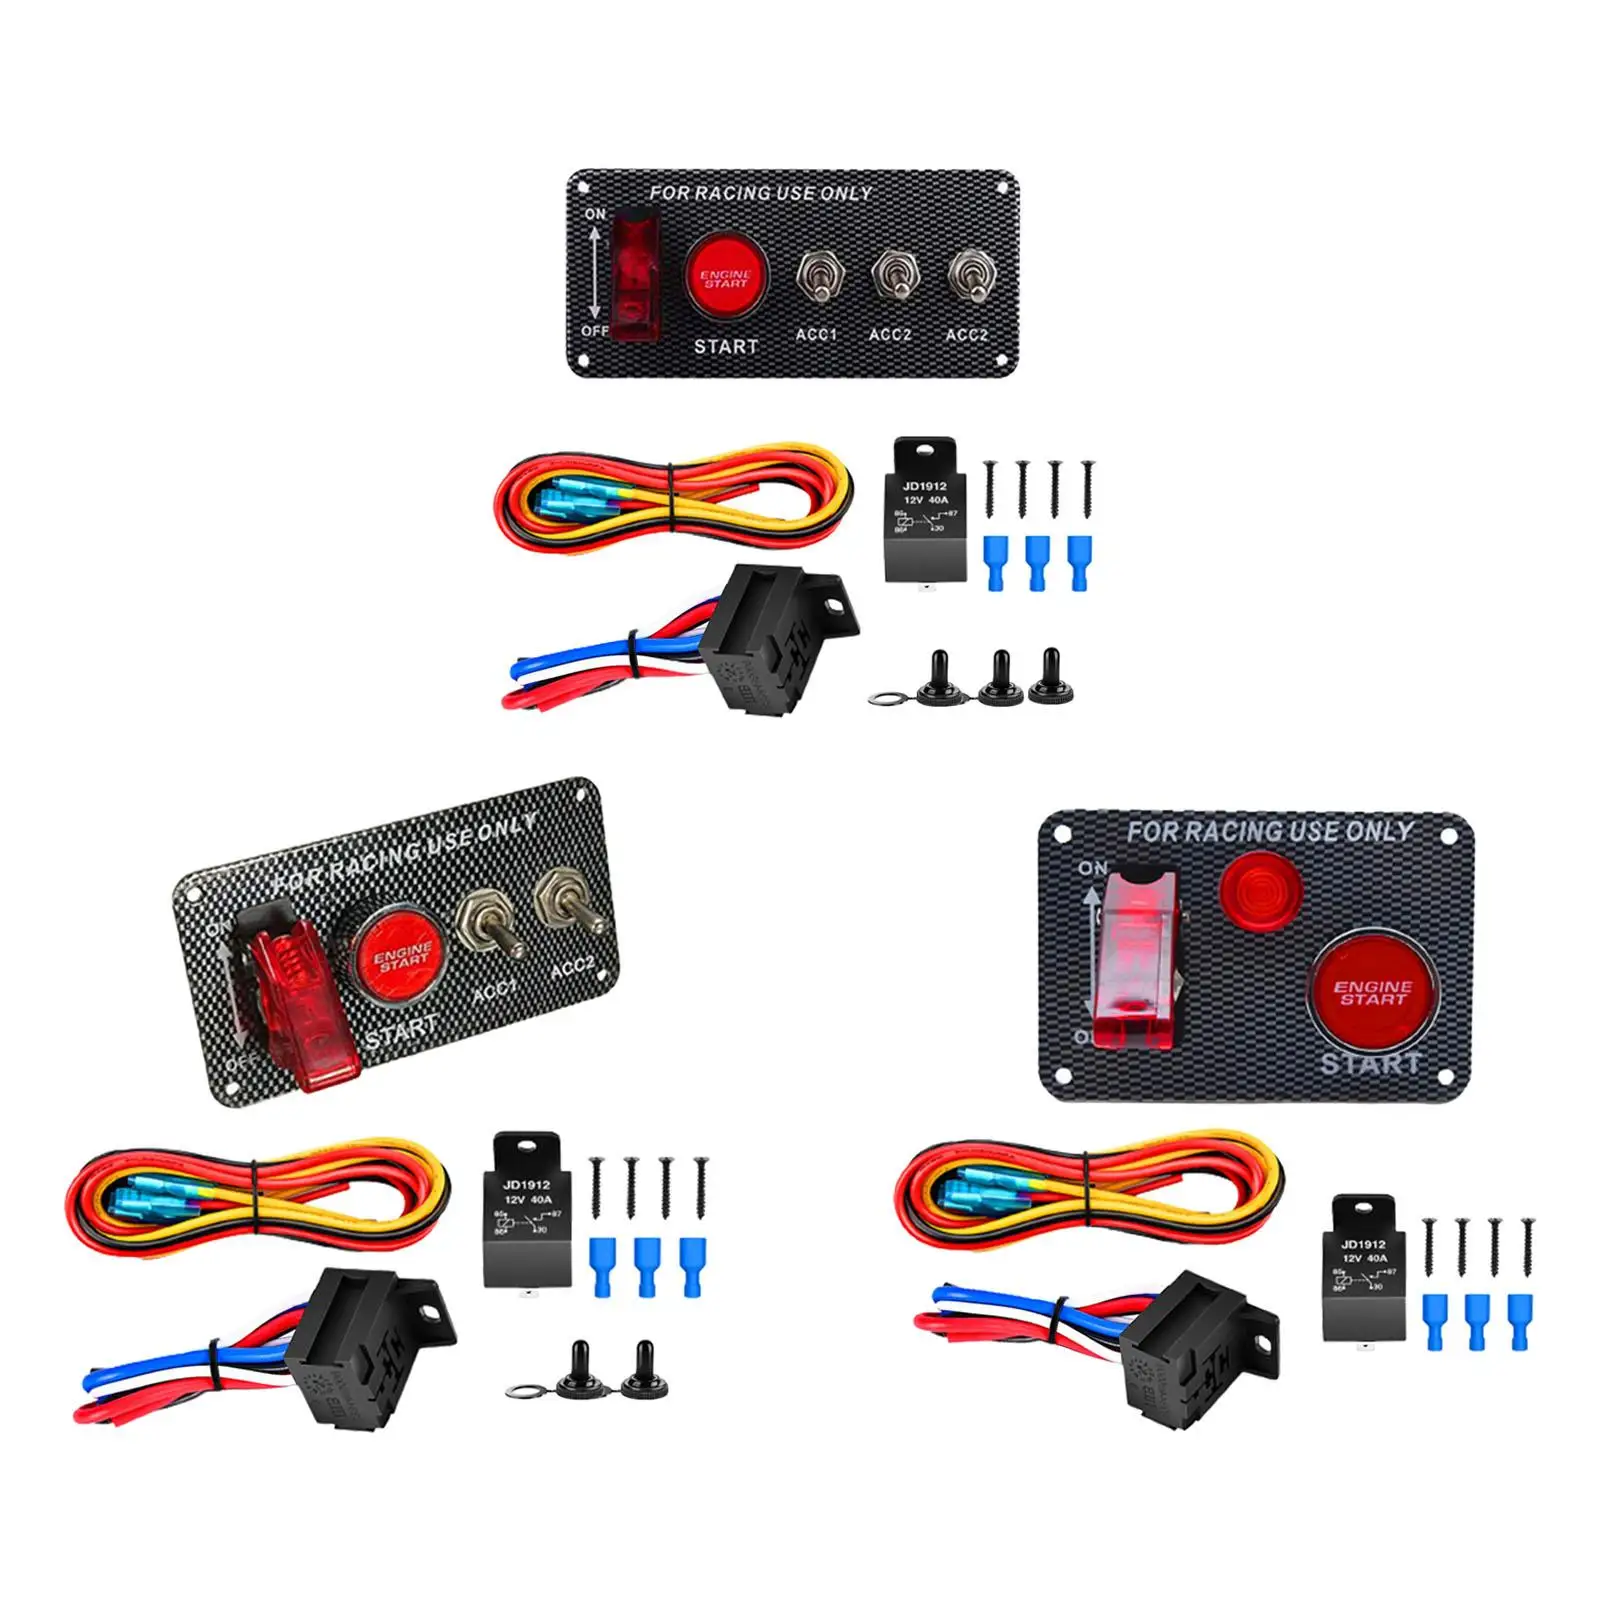 Ignition Switch Panel Car Accessory for 12V Vehicle Caravans